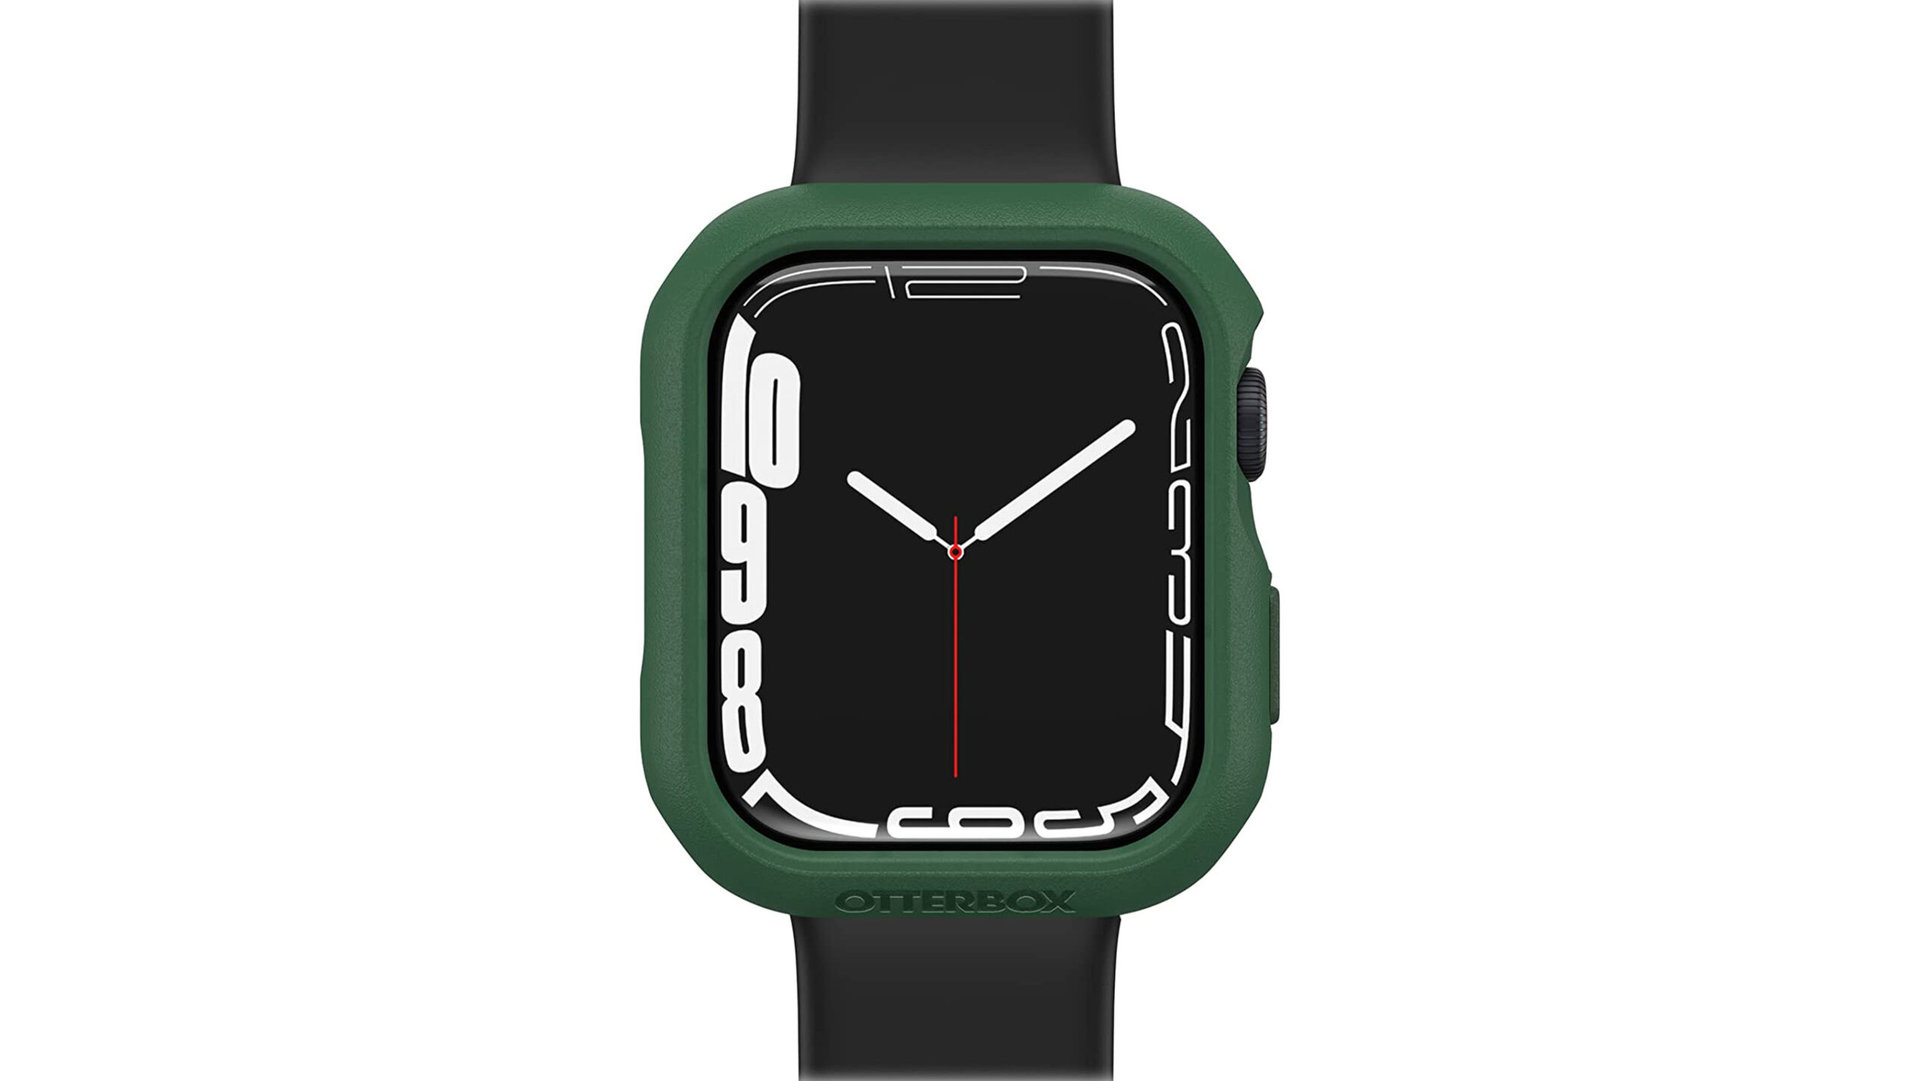 An Otterbox All Day Case in Envy green represent the best sustainable Apple Watch Series 8 case.